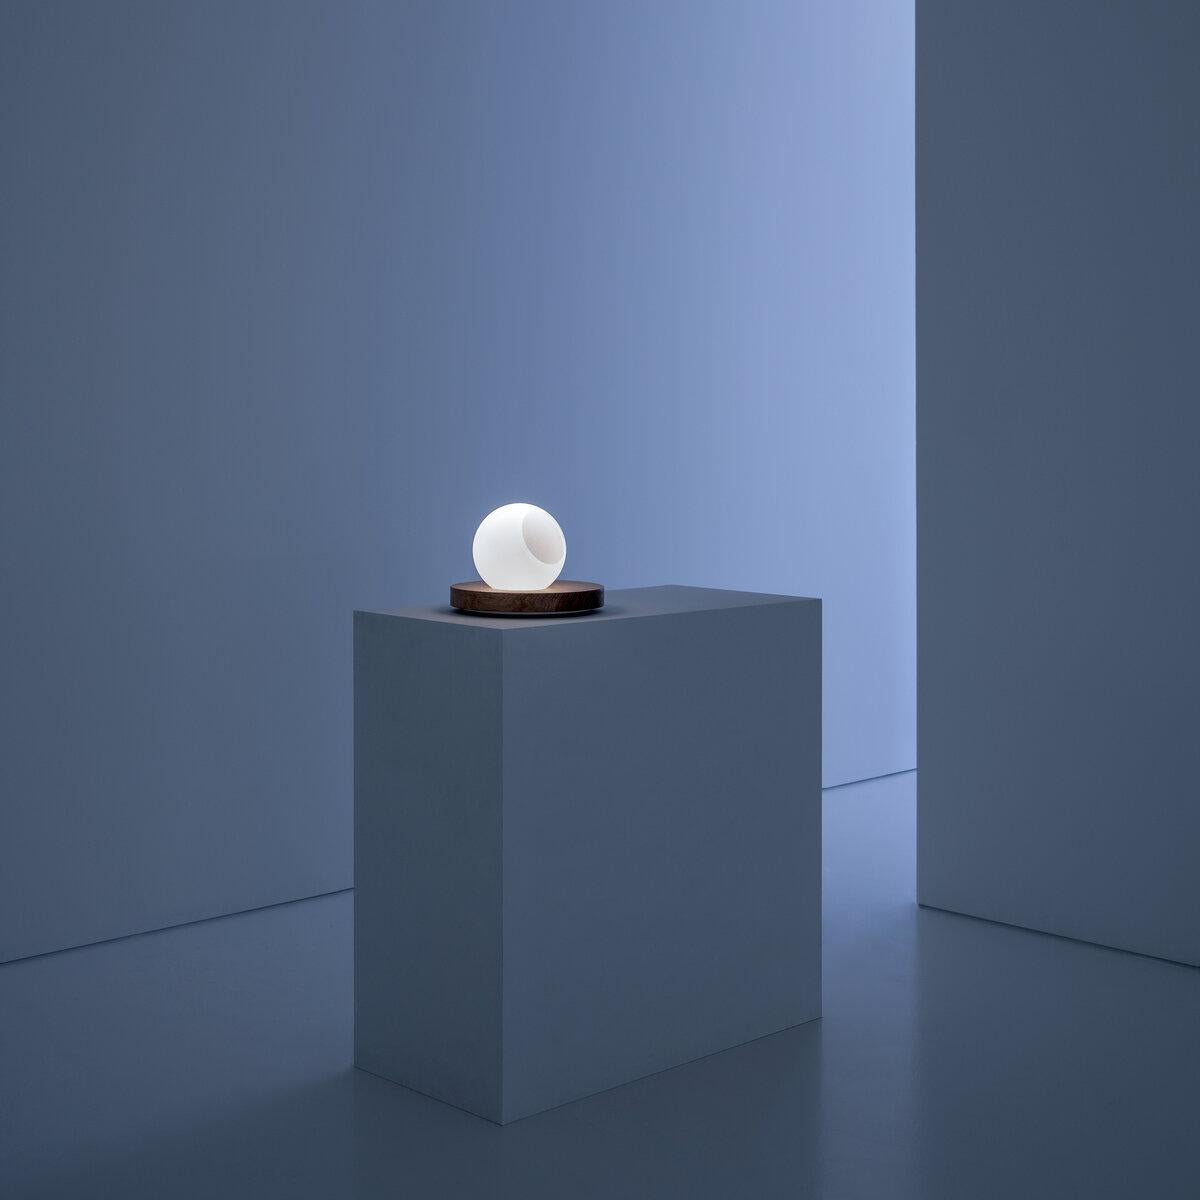 The Pigreco Table Lamp offers an abstract, modern aesthetic consisting of two simple geometric forms, the circle and the sphere. The frosted glass globe can be rotated atop the wooden base to aim light in different directions. Dimmer switch located